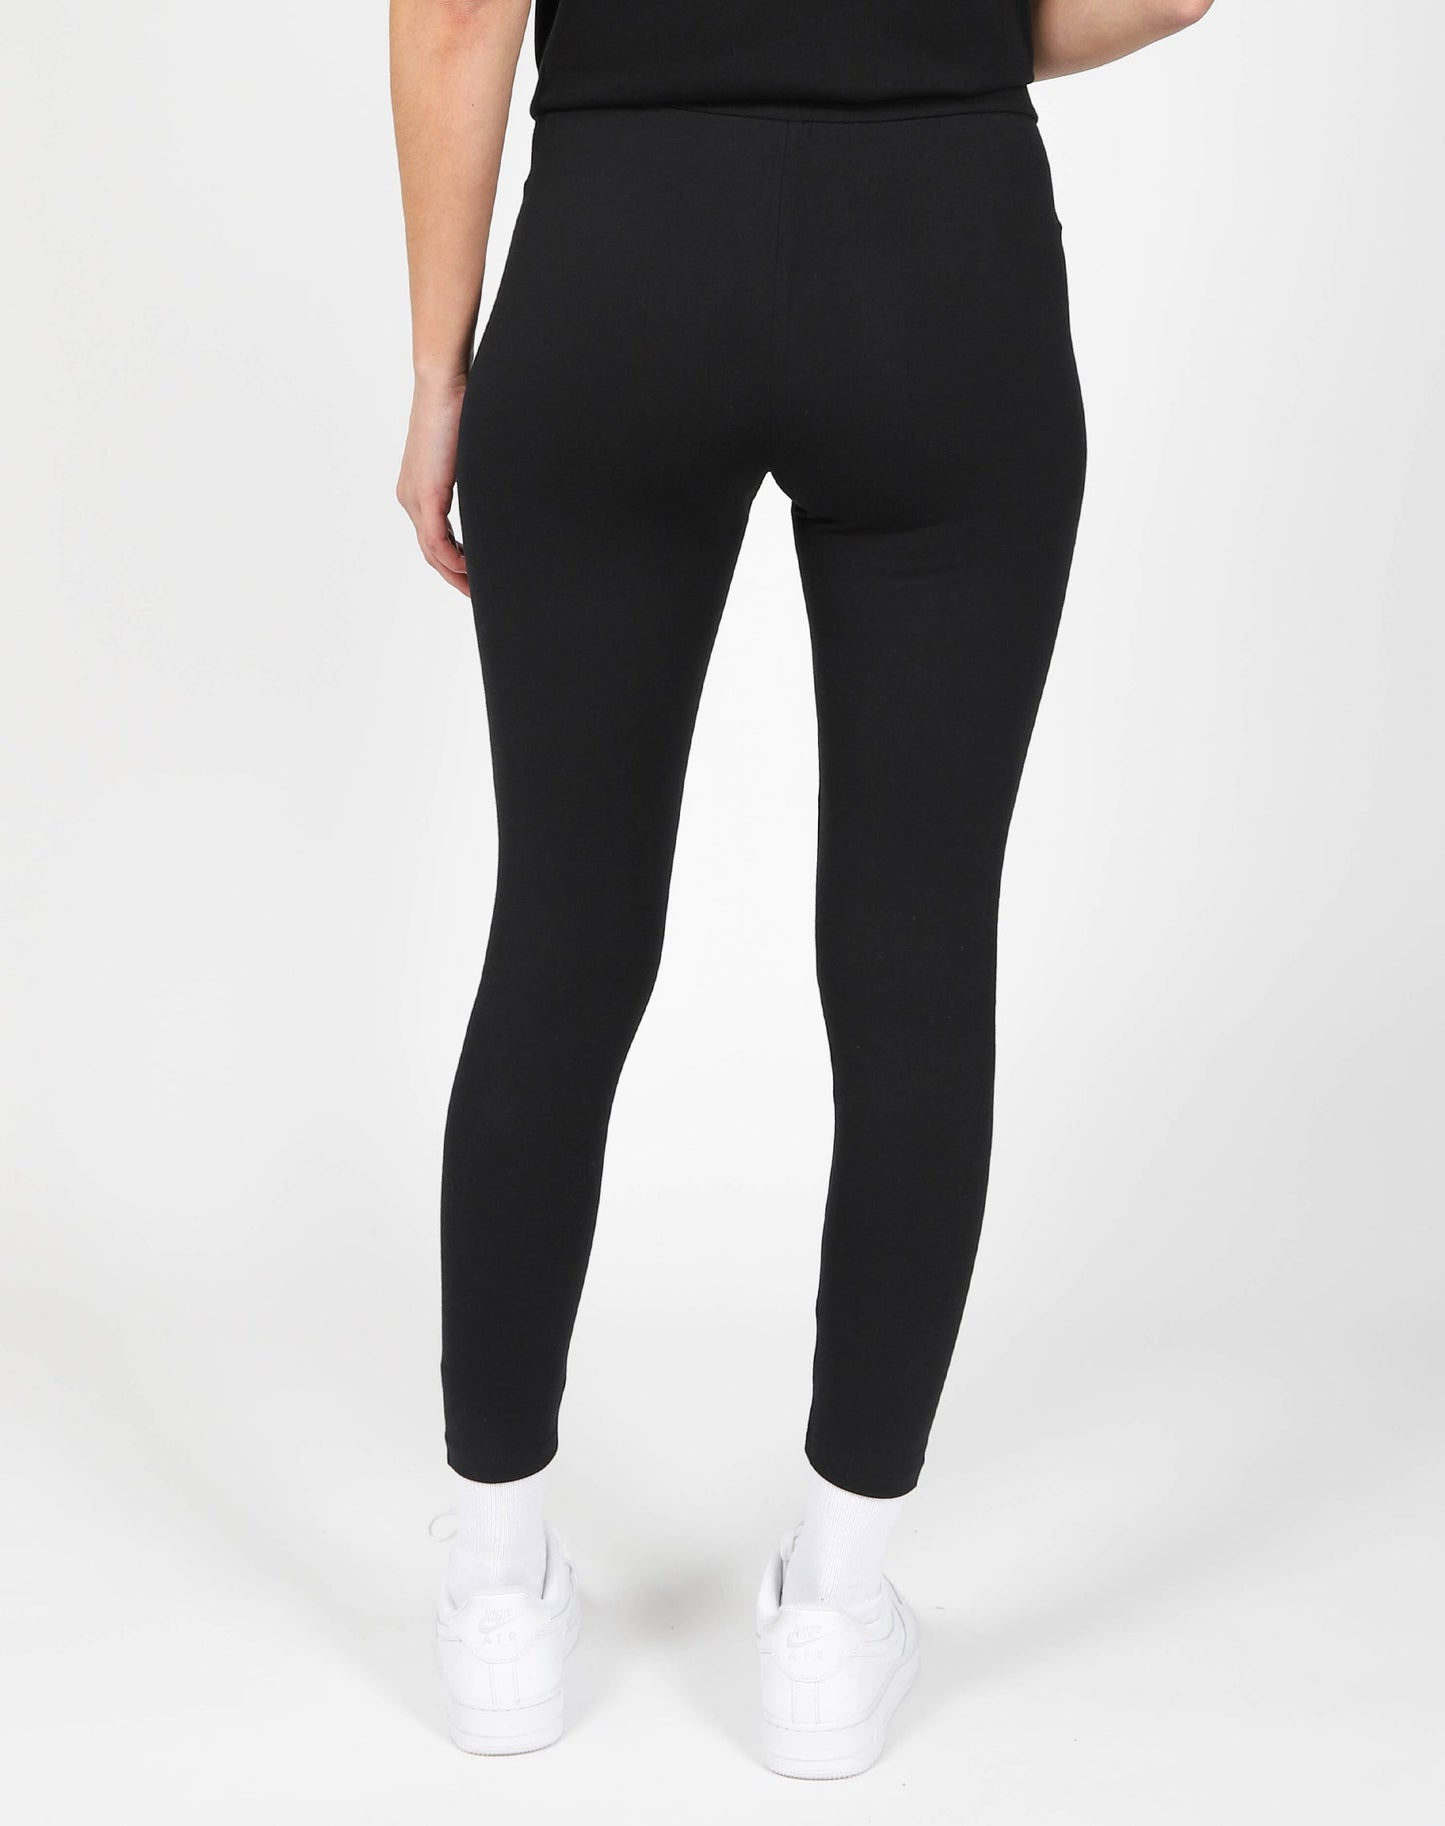 High Waisted Workout Leggings